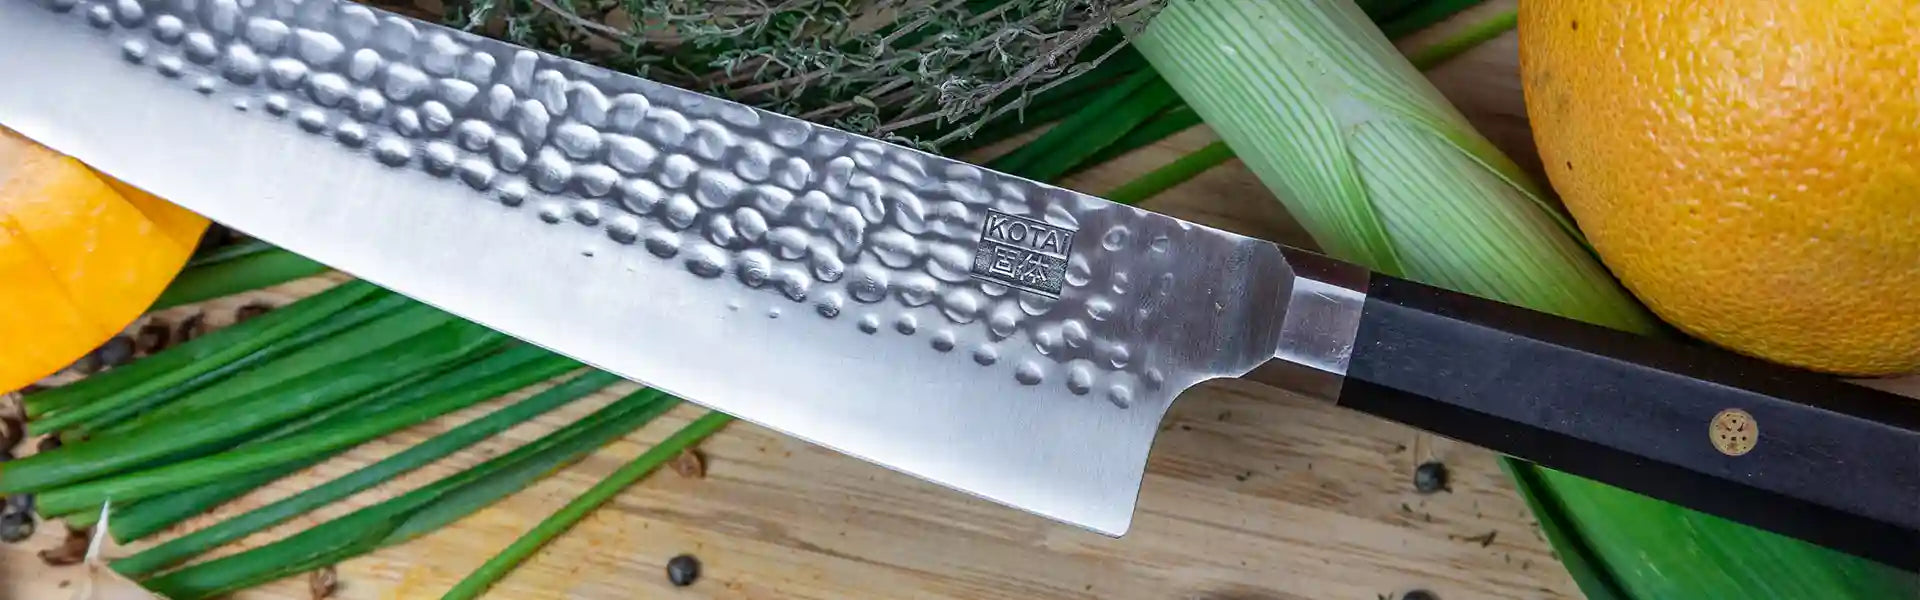 Of all the chef's knives you own, which do you reach for first